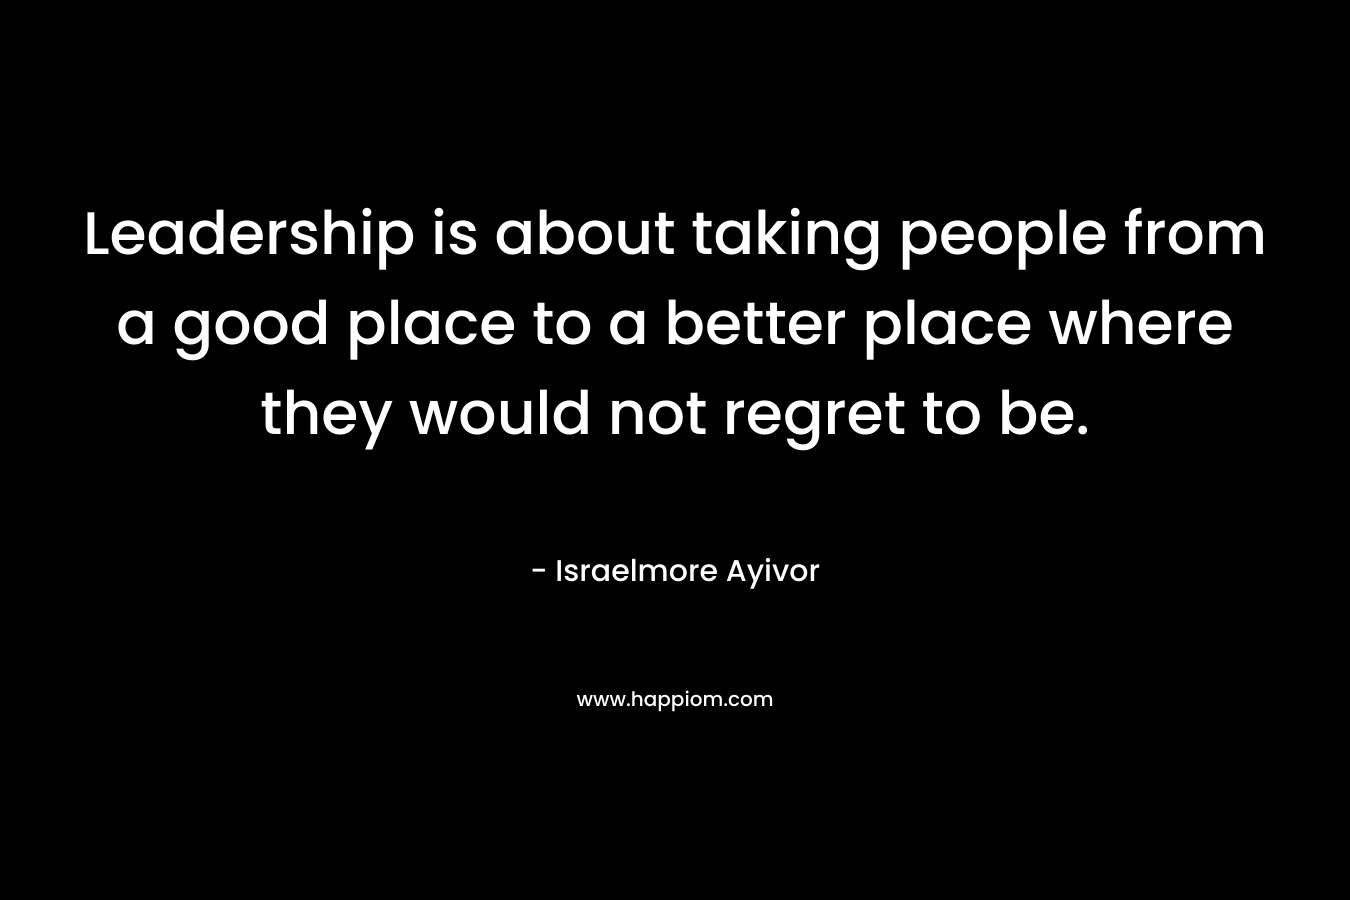 Leadership is about taking people from a good place to a better place where they would not regret to be.